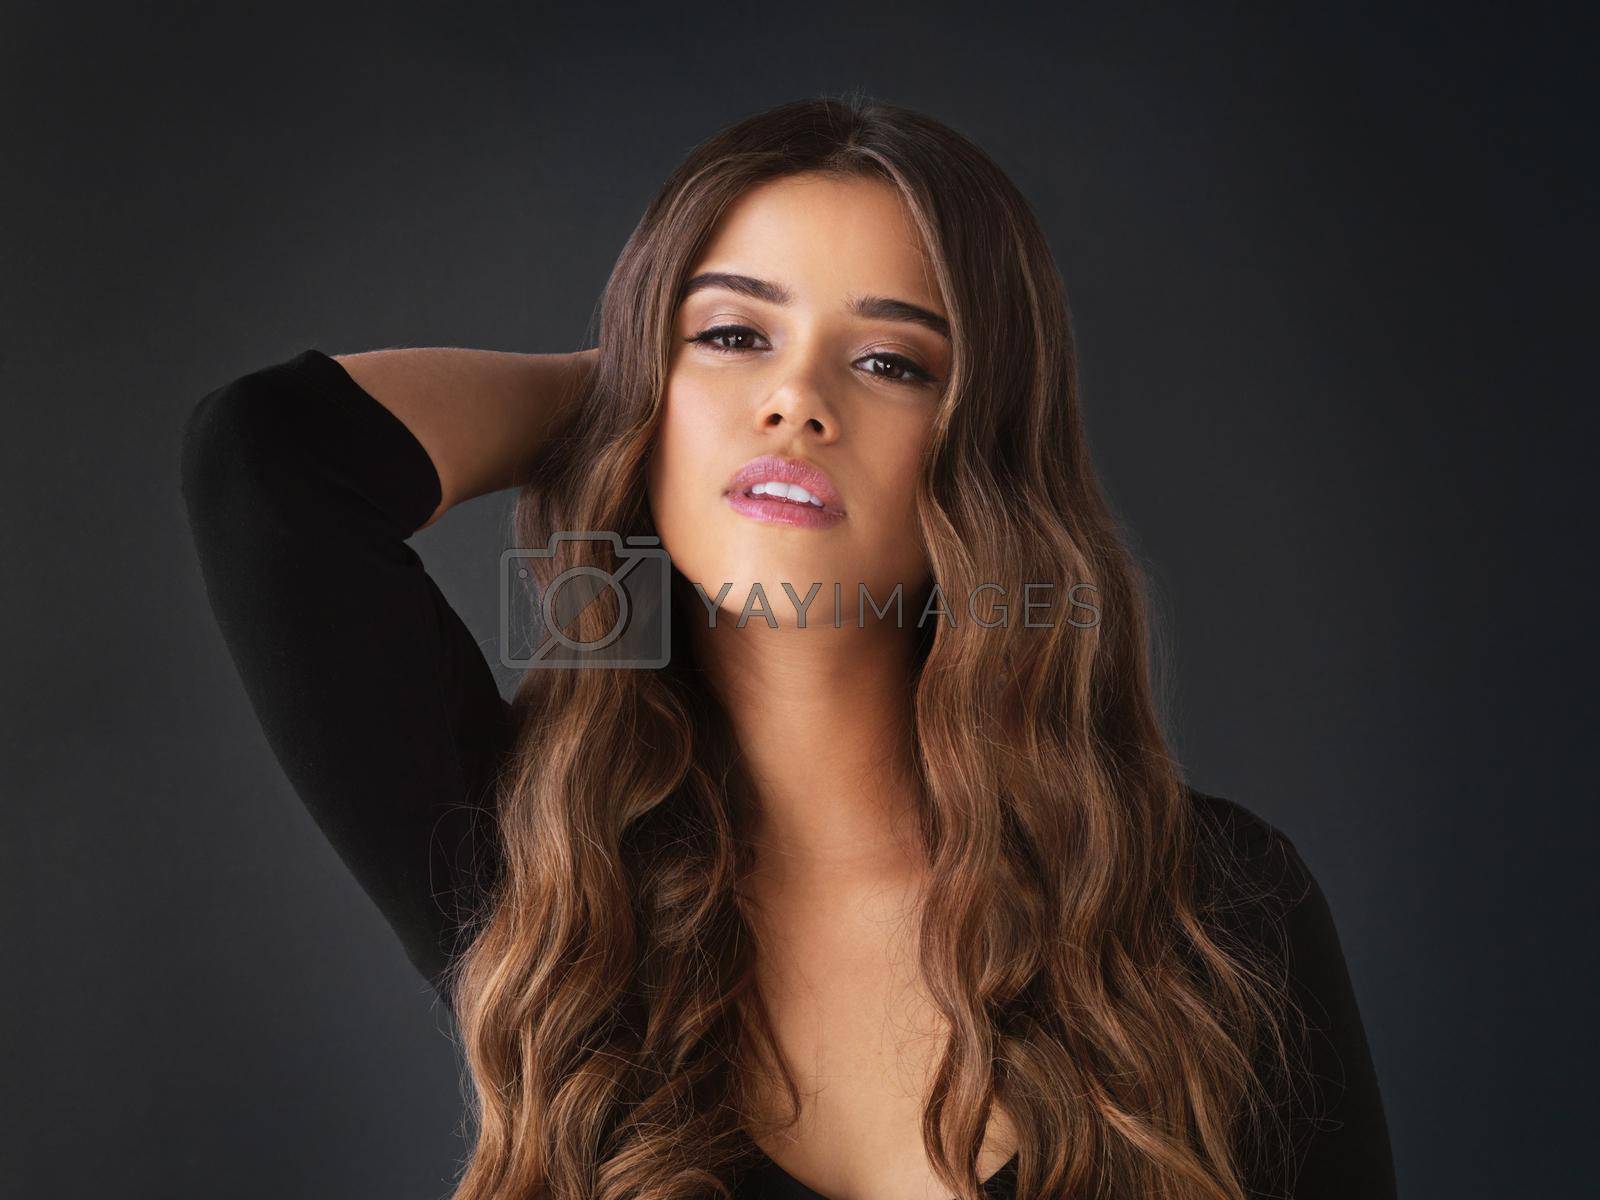 Studio shot of a beautiful young woman against a dark background.